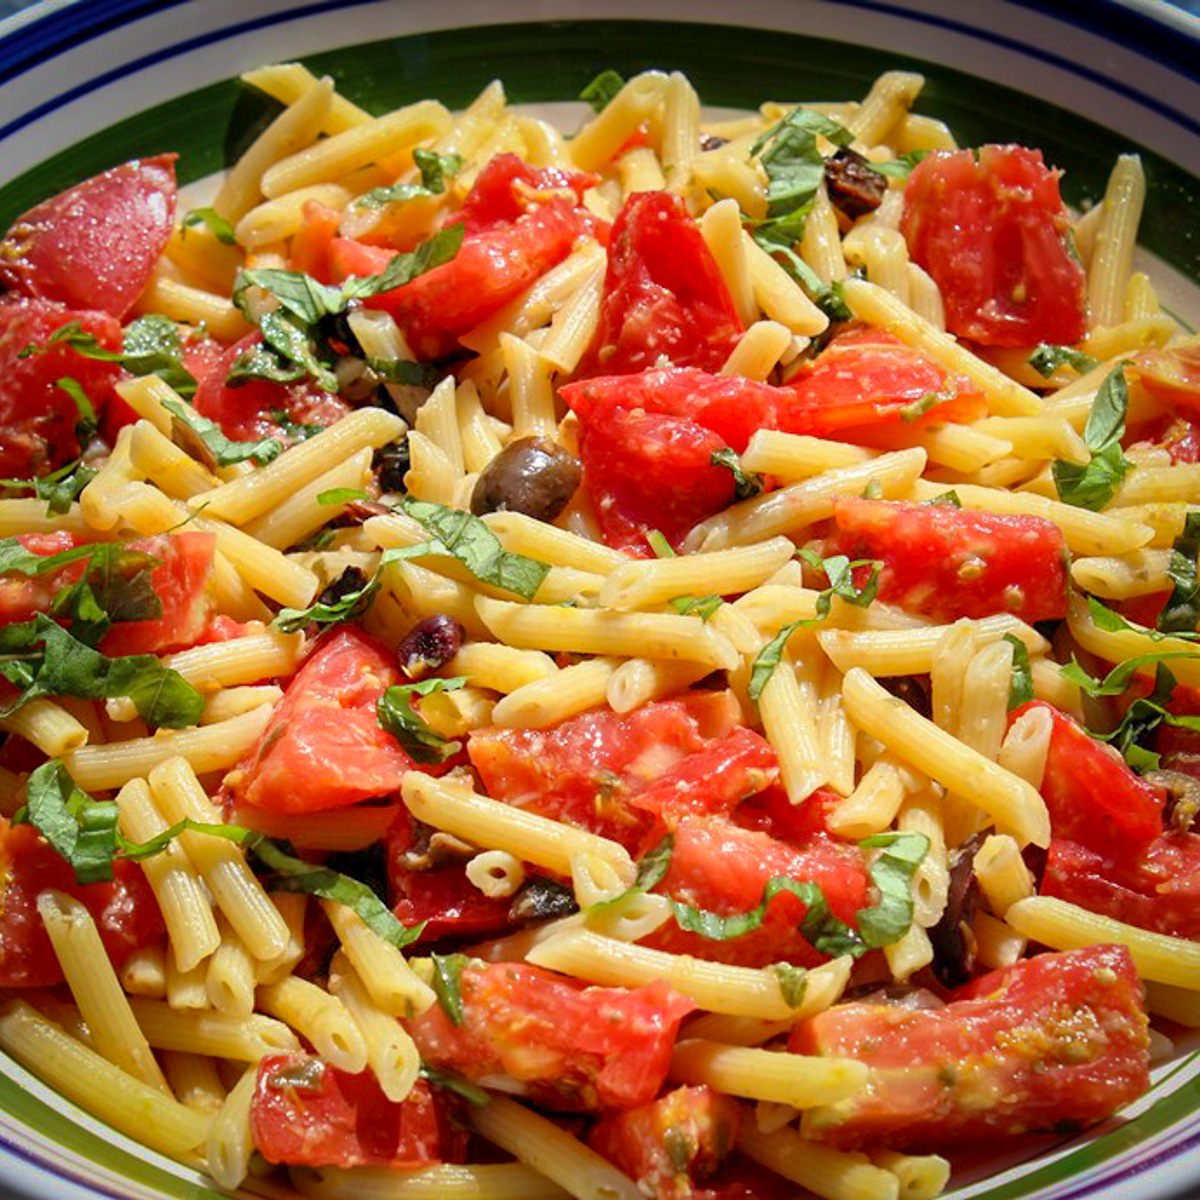 tomato basil pasta with olives and lemon in serving bowl.